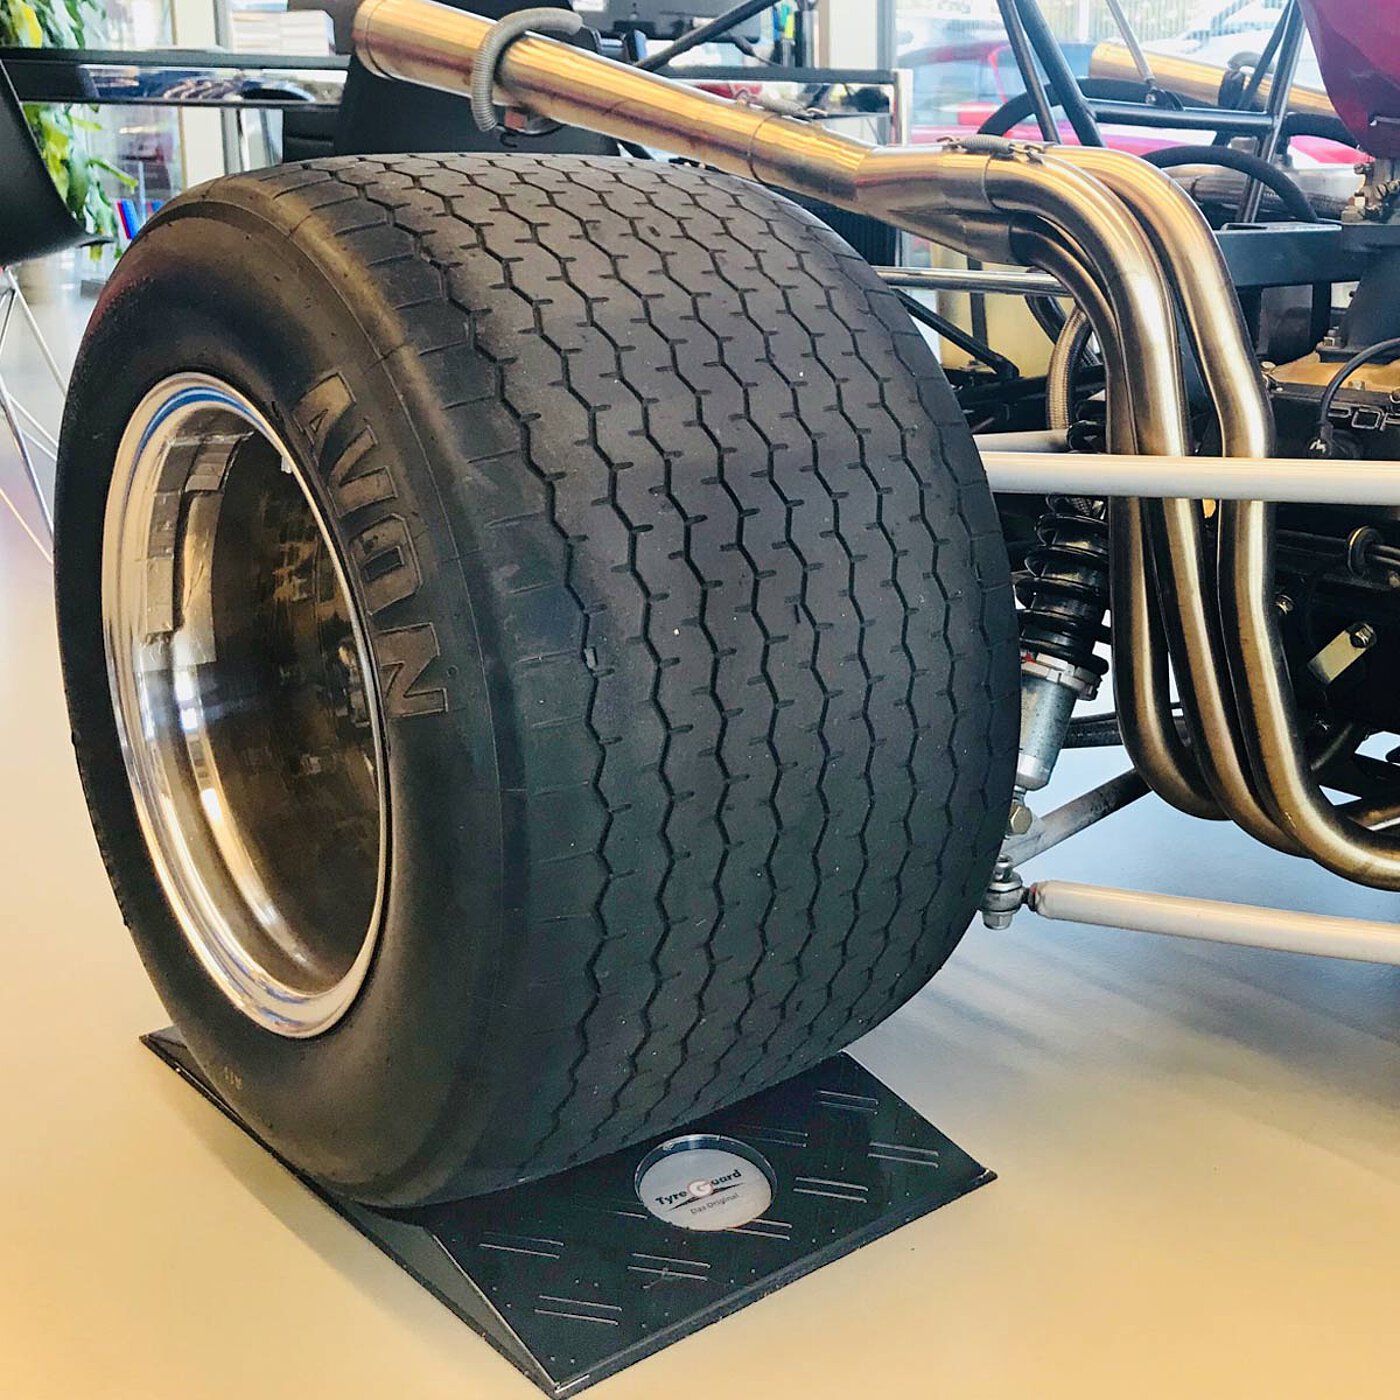 a black concave-shaped TyreGuard® tyre protector made of high-strength plastics, underneath a hot-rod car with openly ducted side exhaust pipe and very broad tyres